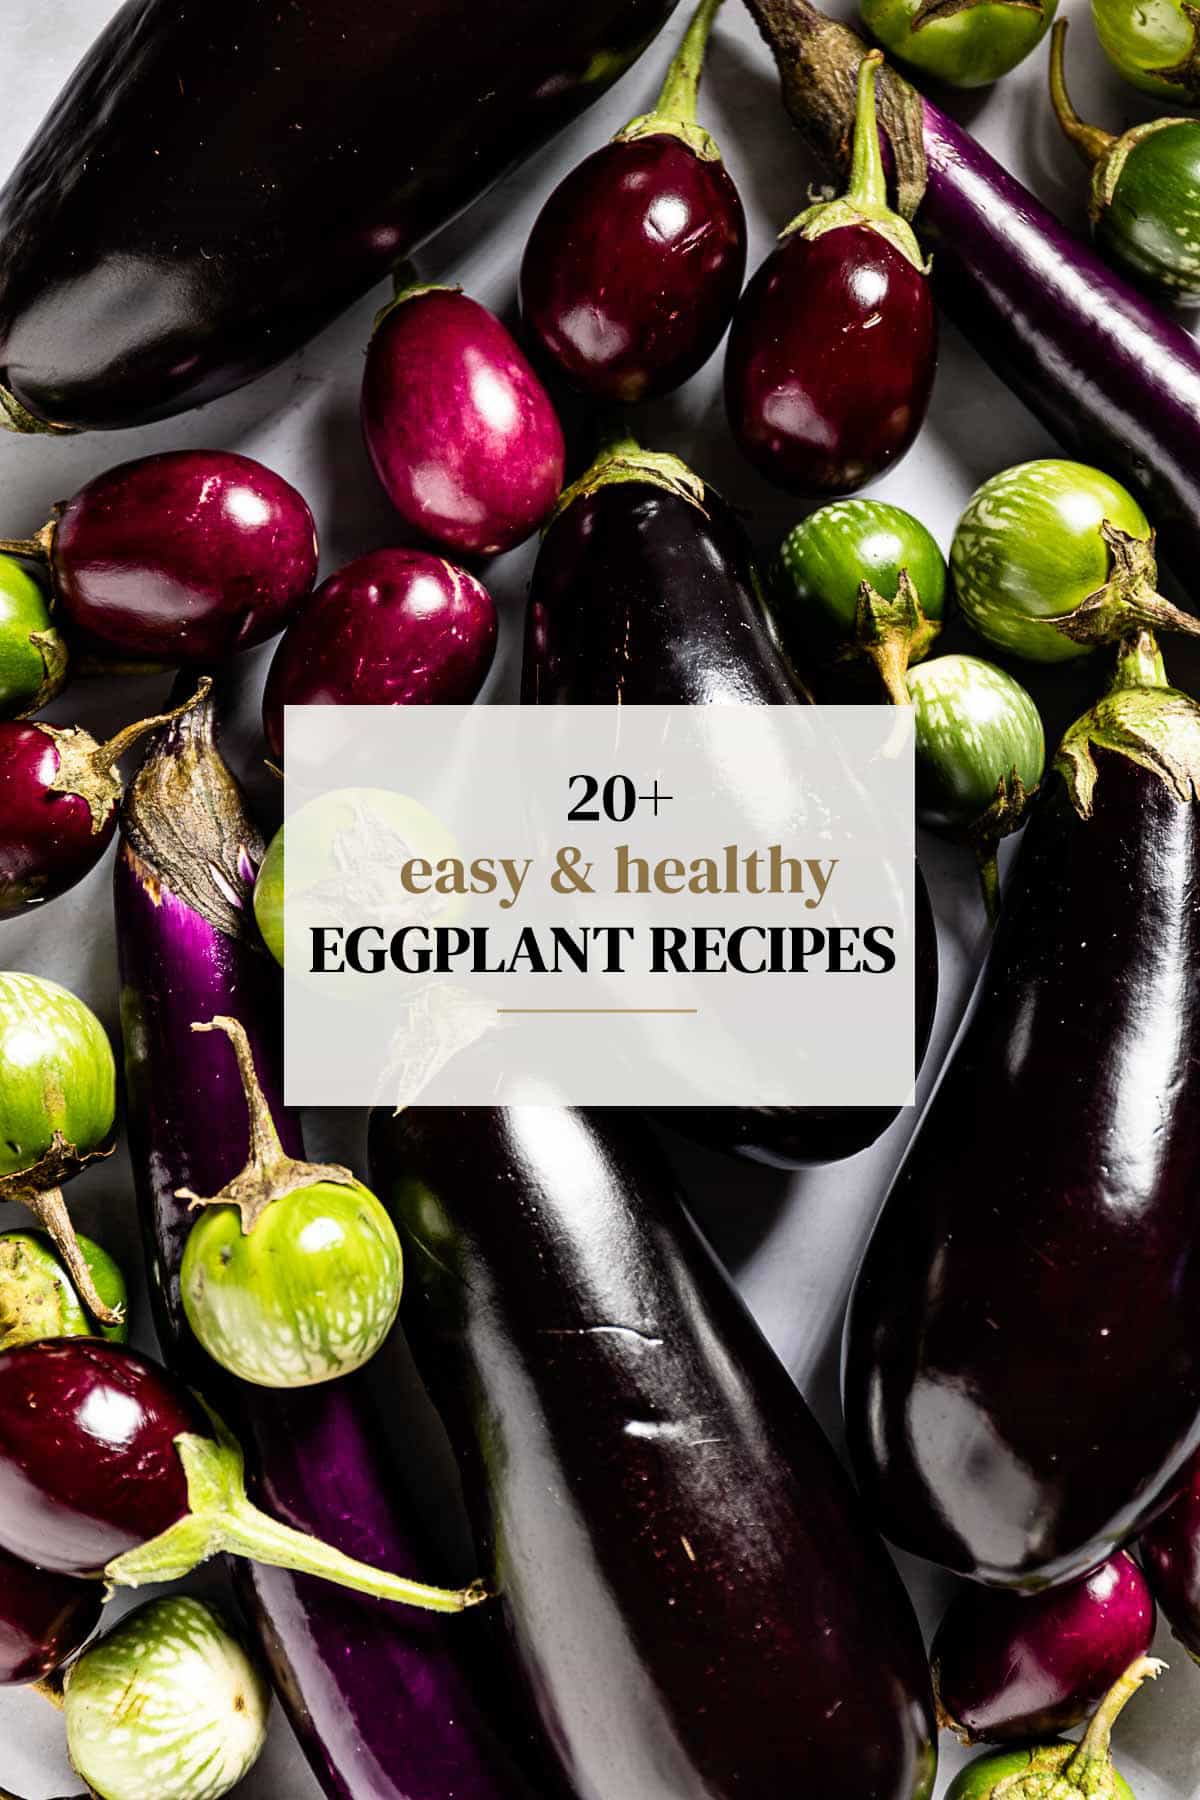 A photo of variety of eggplants with text on the image.